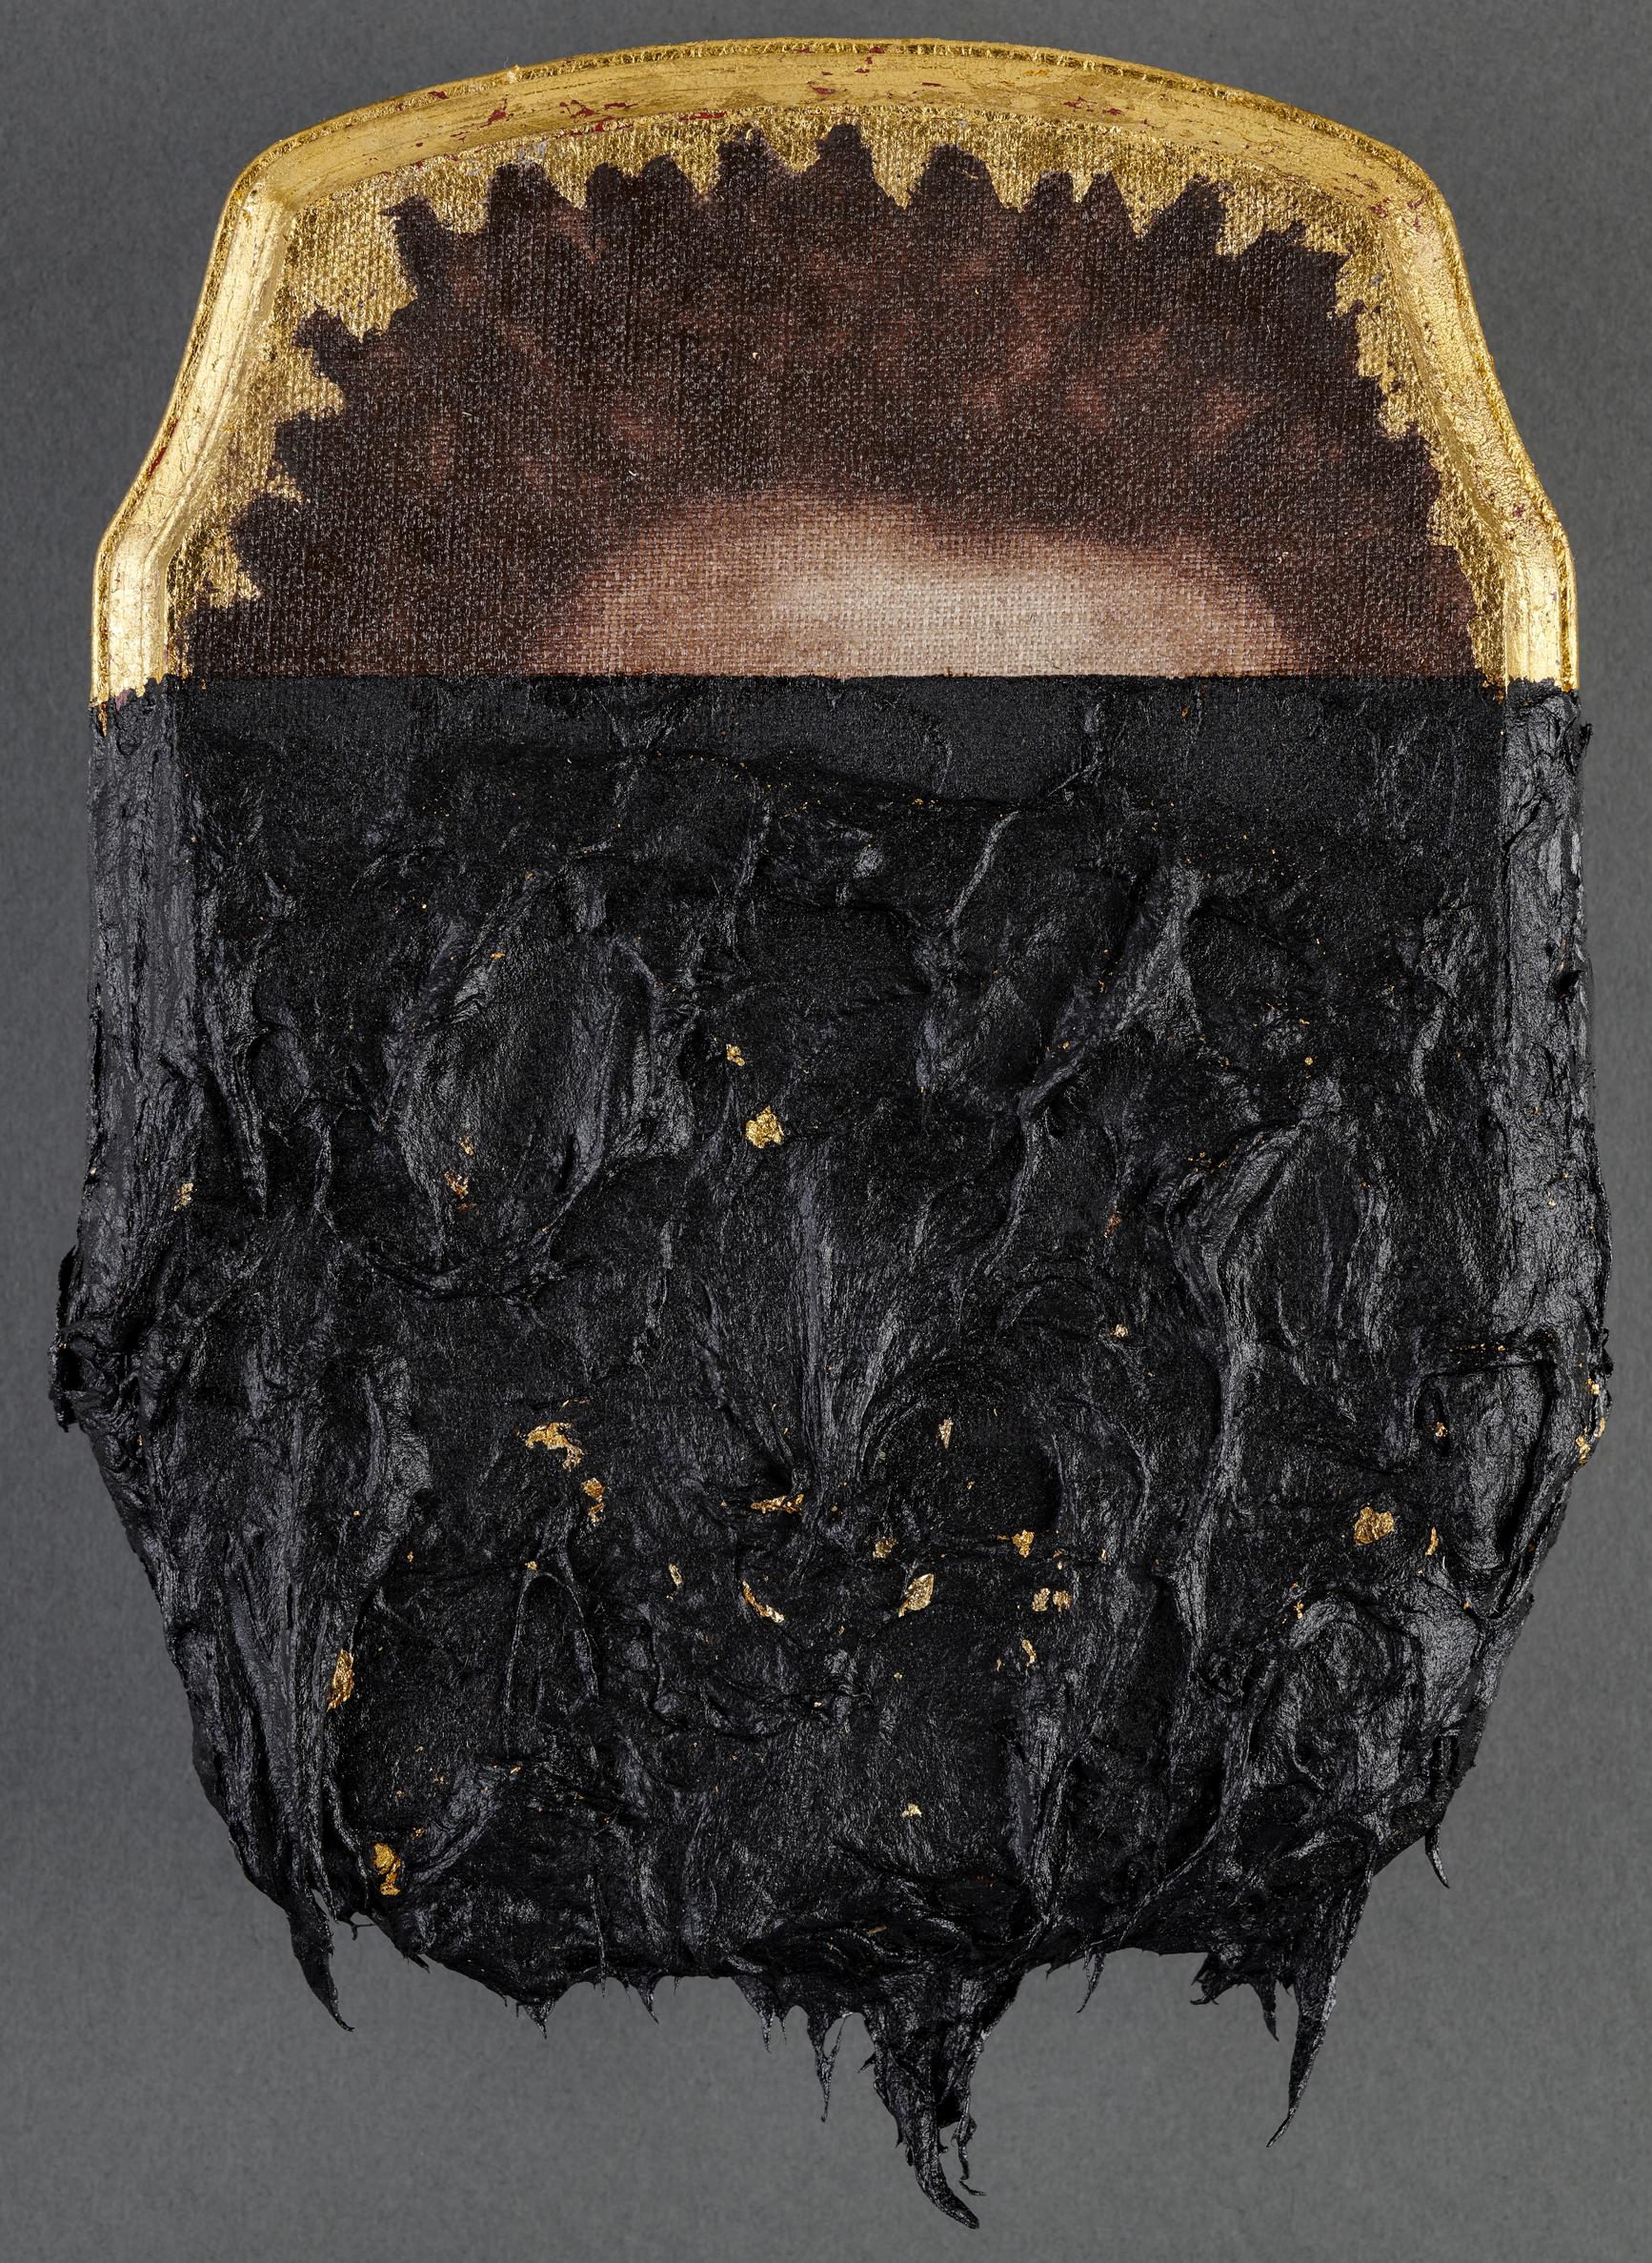 Titus Kaphar, Jerome XIX, 2014. Oil, tar, and gold leaf on panel. 25.4 x 17.8 x 2.5 cm (10 x 7 x 1 in.). Collection of Lonti Ebers. 